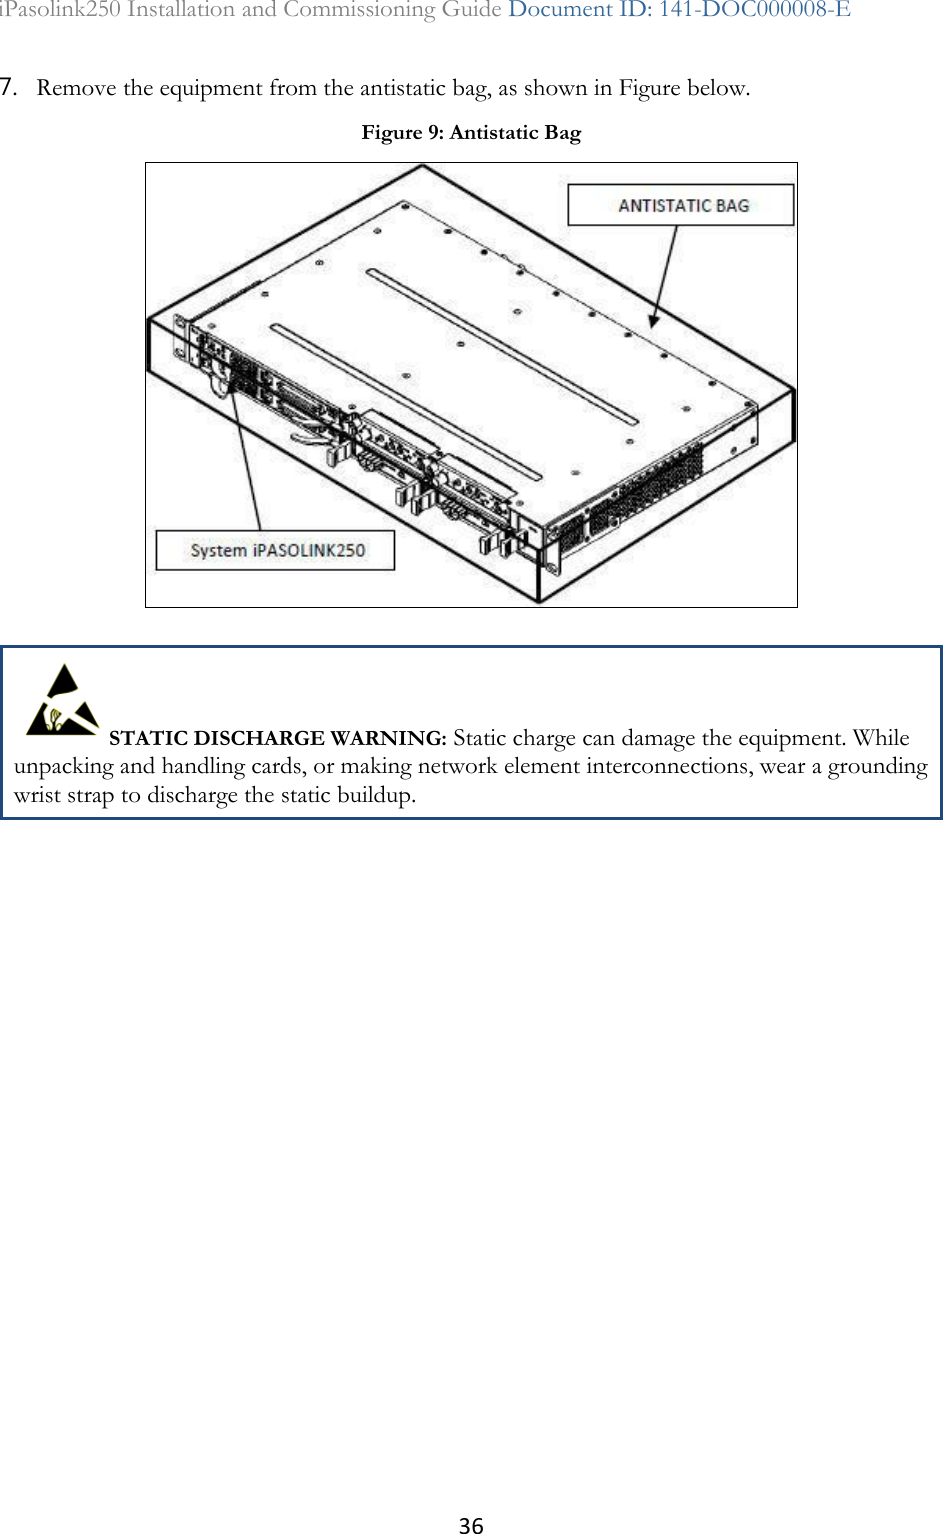 36 iPasolink250 Installation and Commissioning Guide Document ID: 141-DOC000008-E  7. Remove the equipment from the antistatic bag, as shown in Figure below.  STATIC DISCHARGE WARNING: Static charge can damage the equipment. While unpacking and handling cards, or making network element interconnections, wear a grounding wrist strap to discharge the static buildup.  Figure 9: Antistatic Bag  